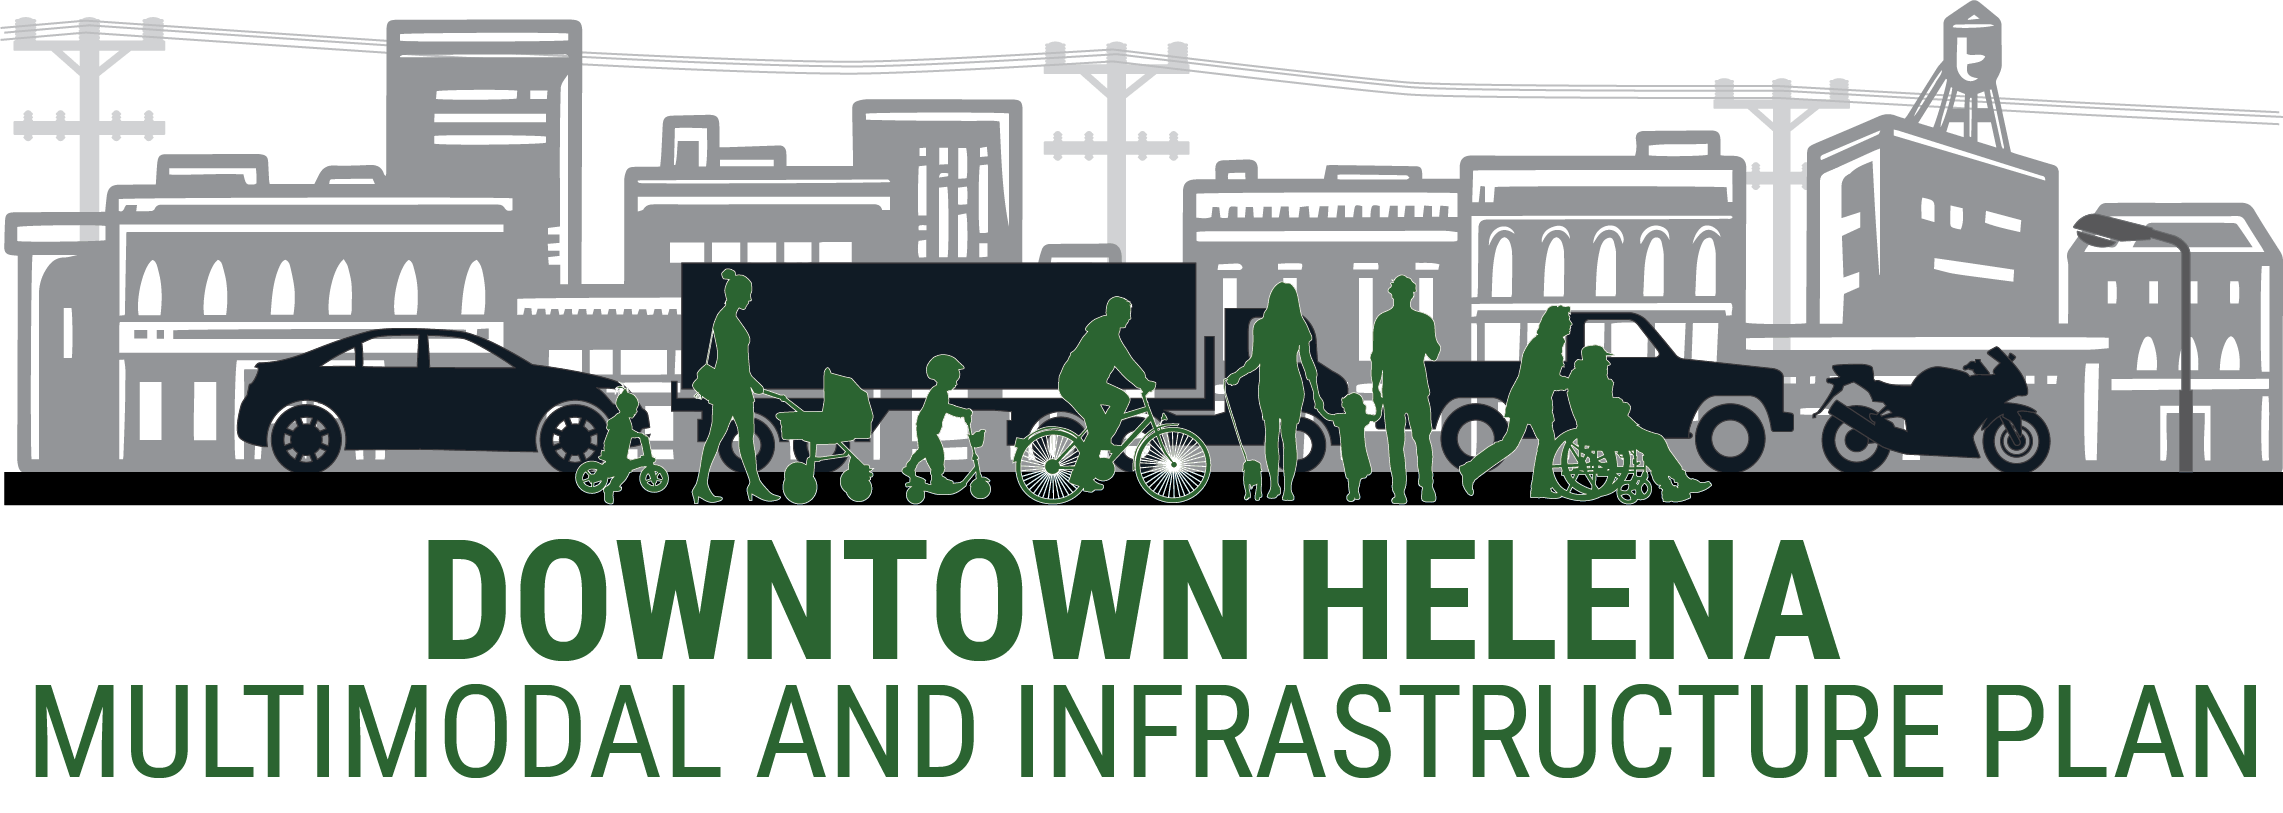 Downtown Helena Multimodal and Infrastructure Plan